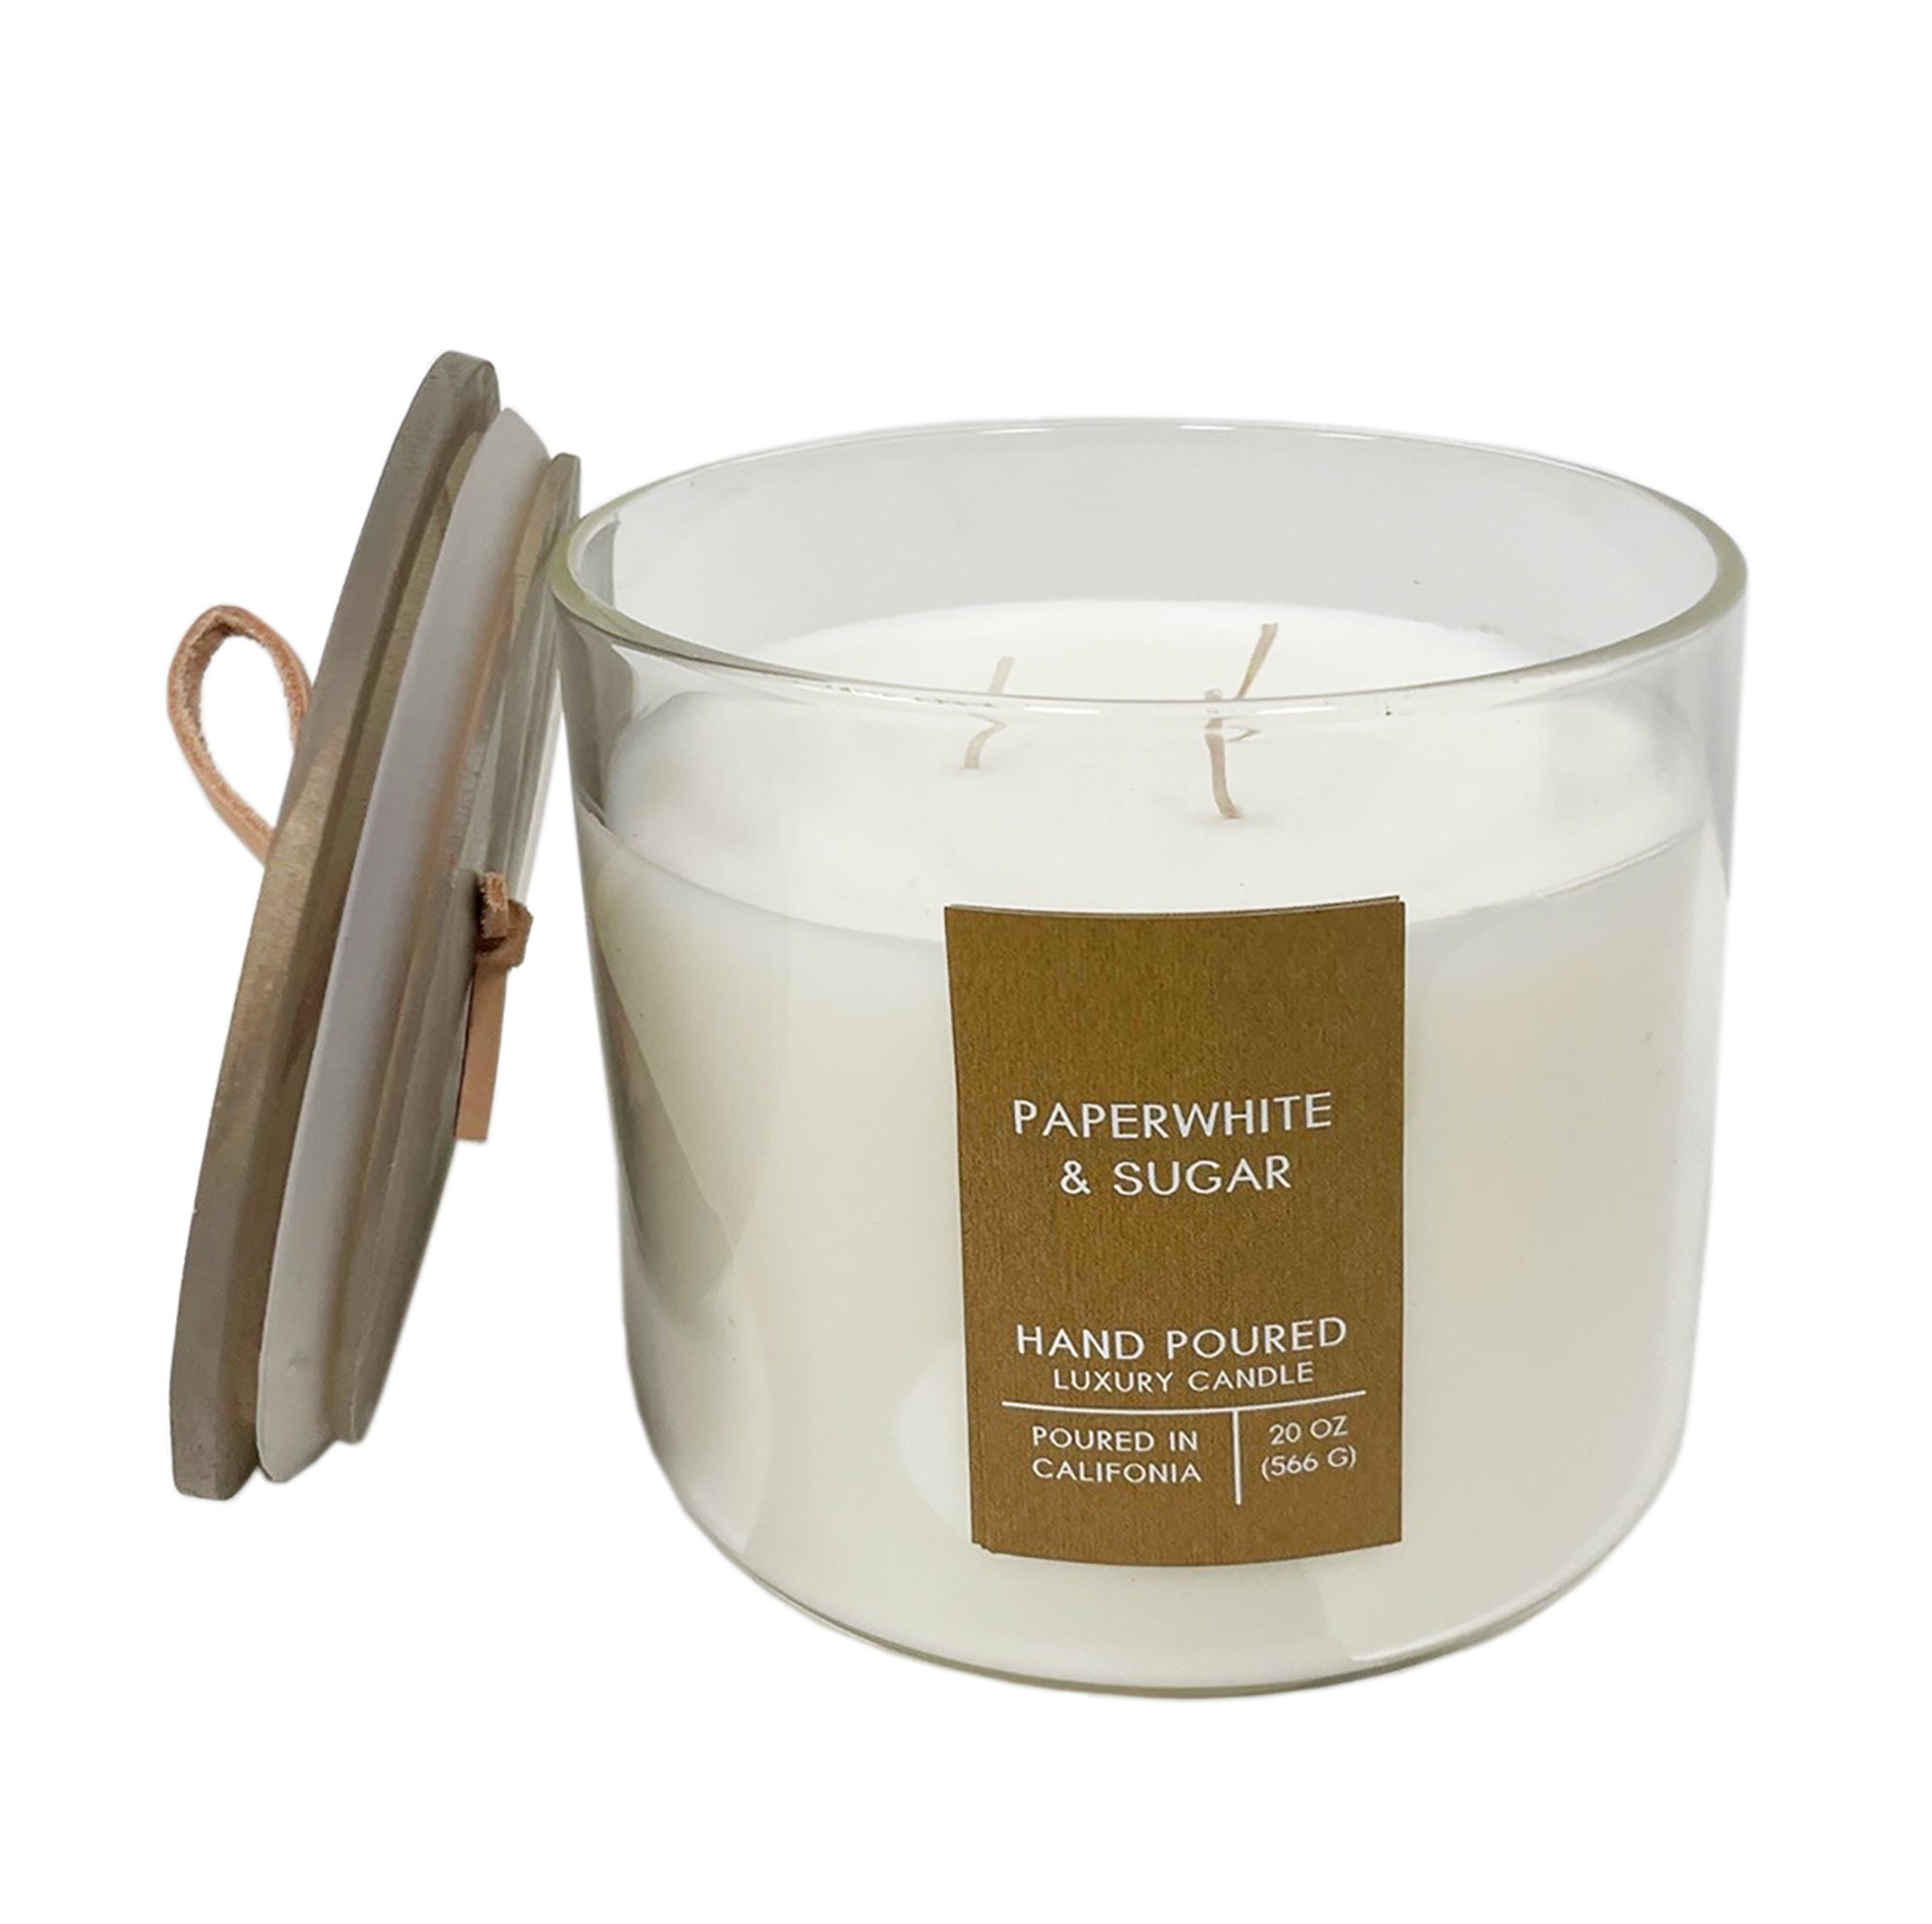 Paperwhite & Sugar Botanical Tie 20 oz. Candle with Lid